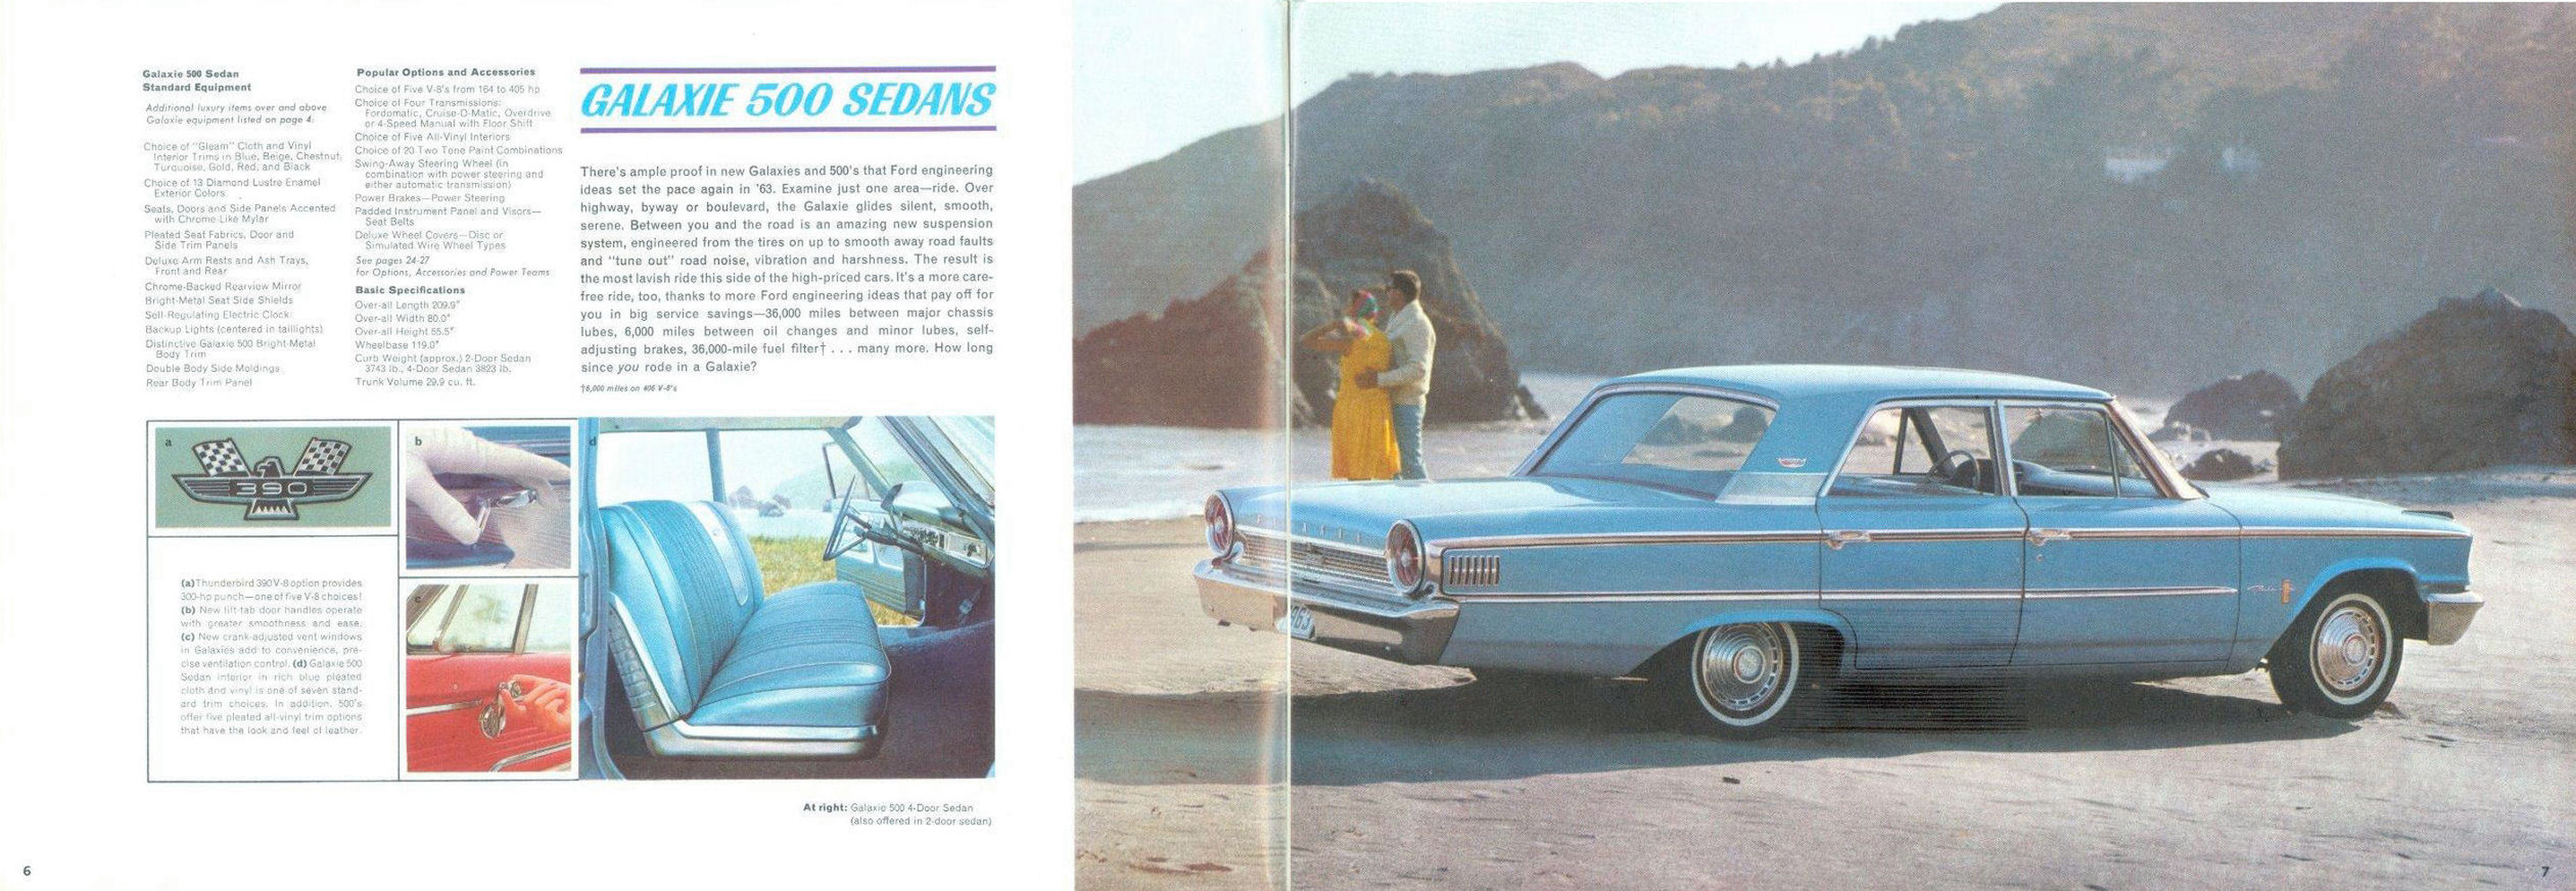 1963_Ford_Full_Size-06-07